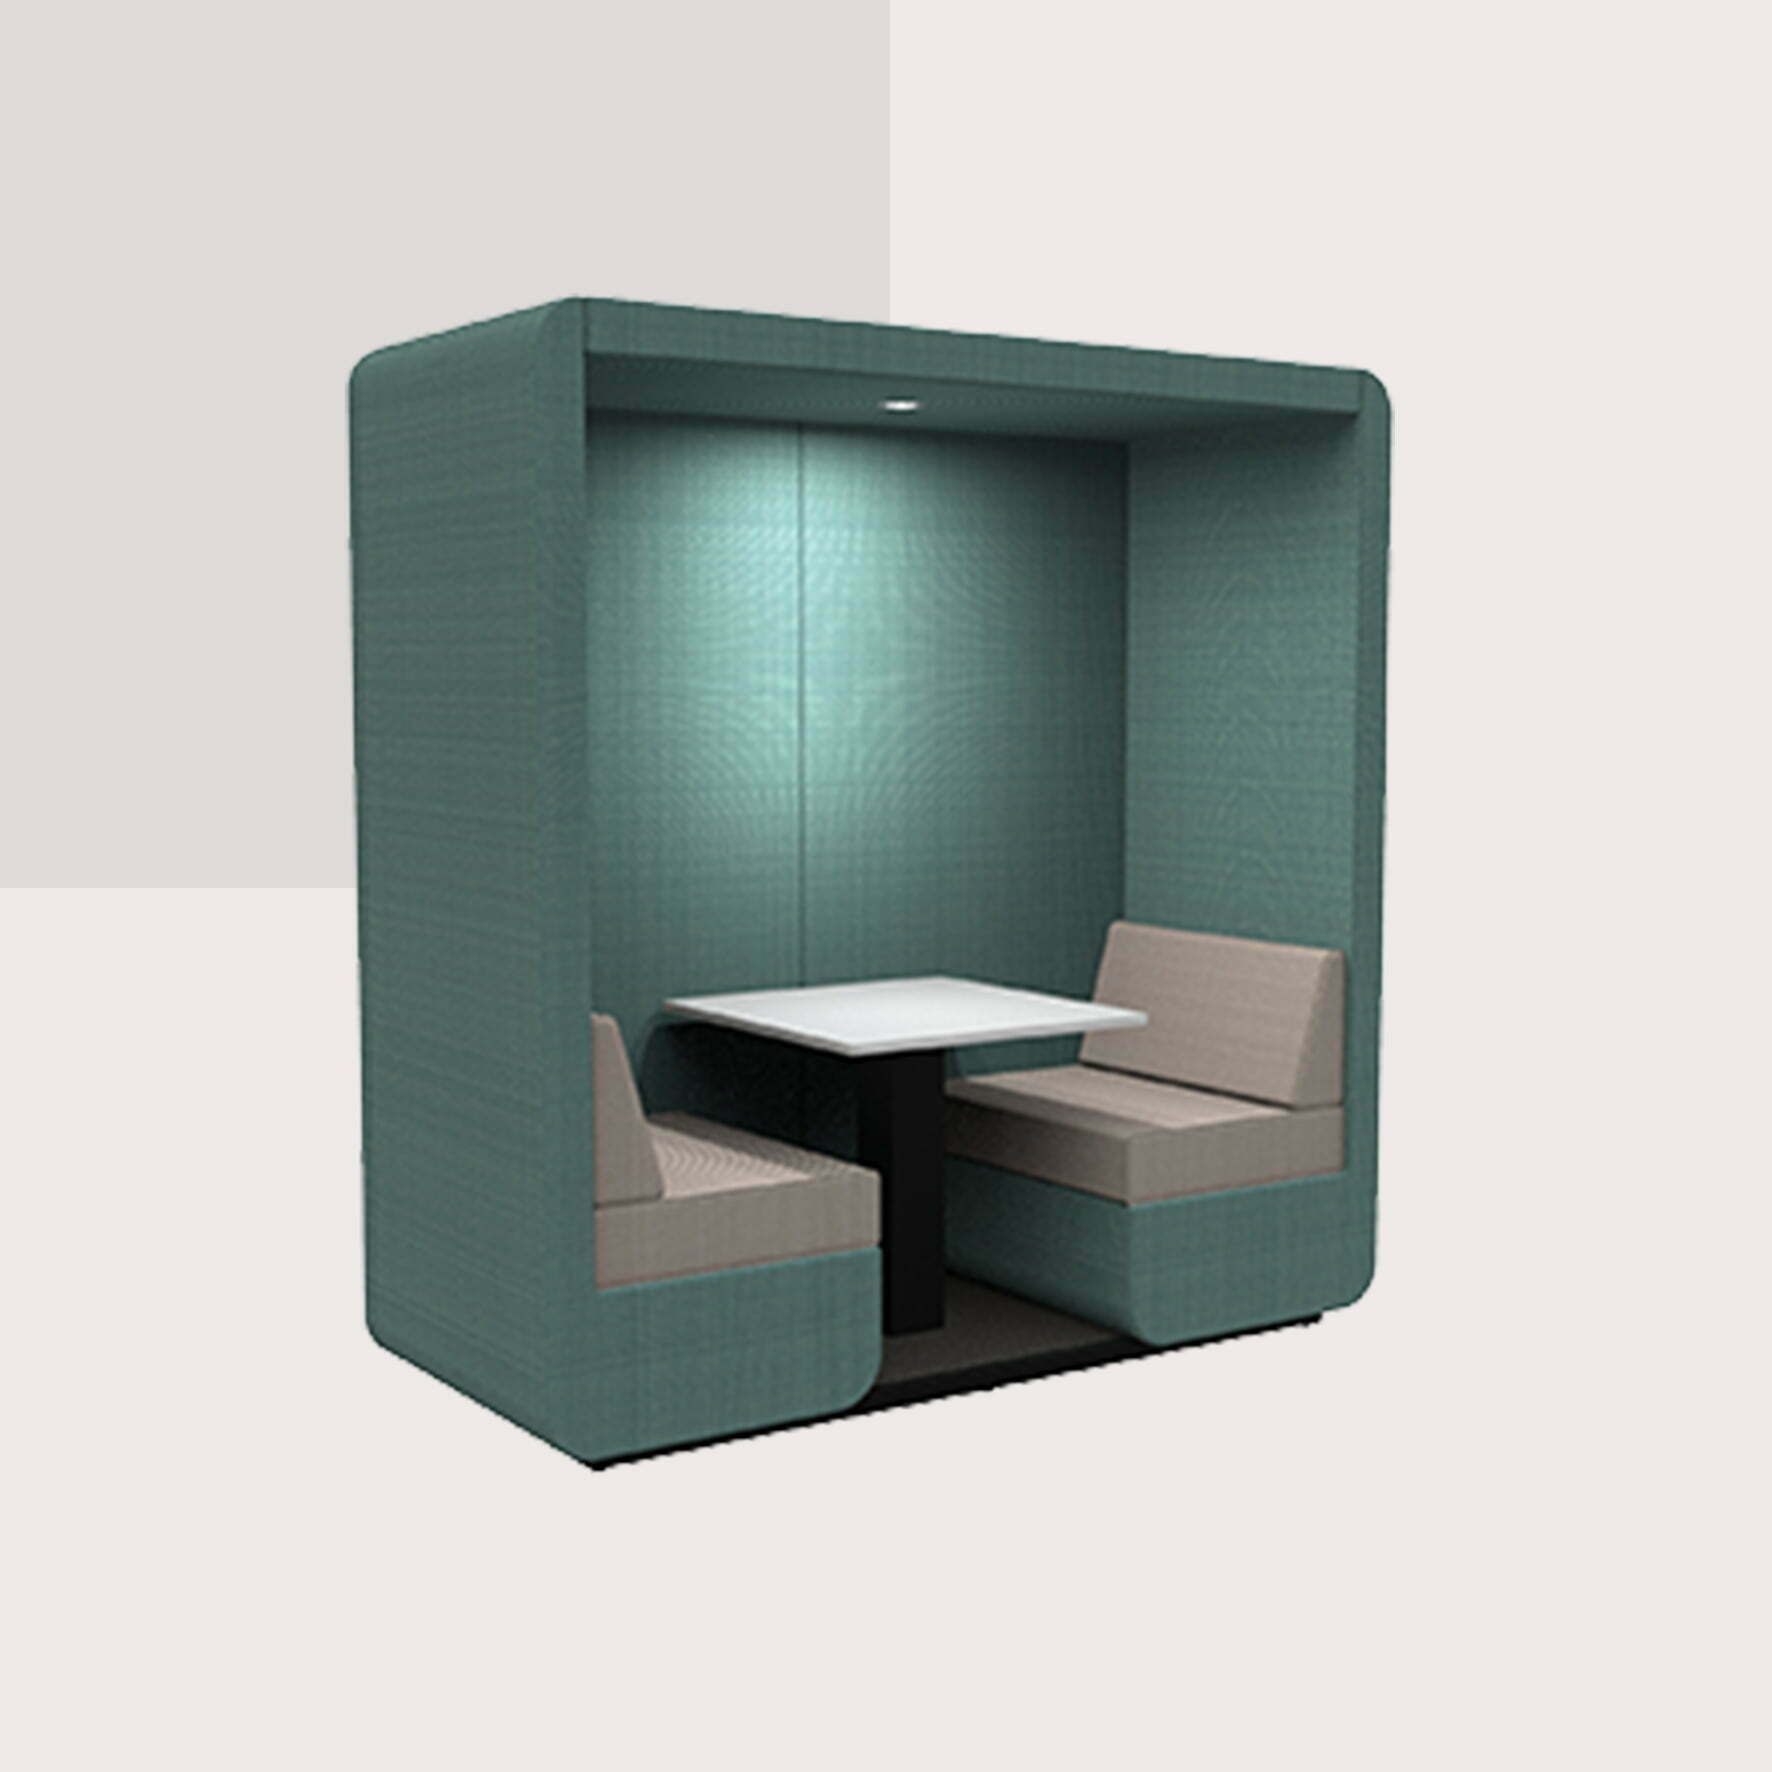 Bob 2 Seat booth with upholstered end wall